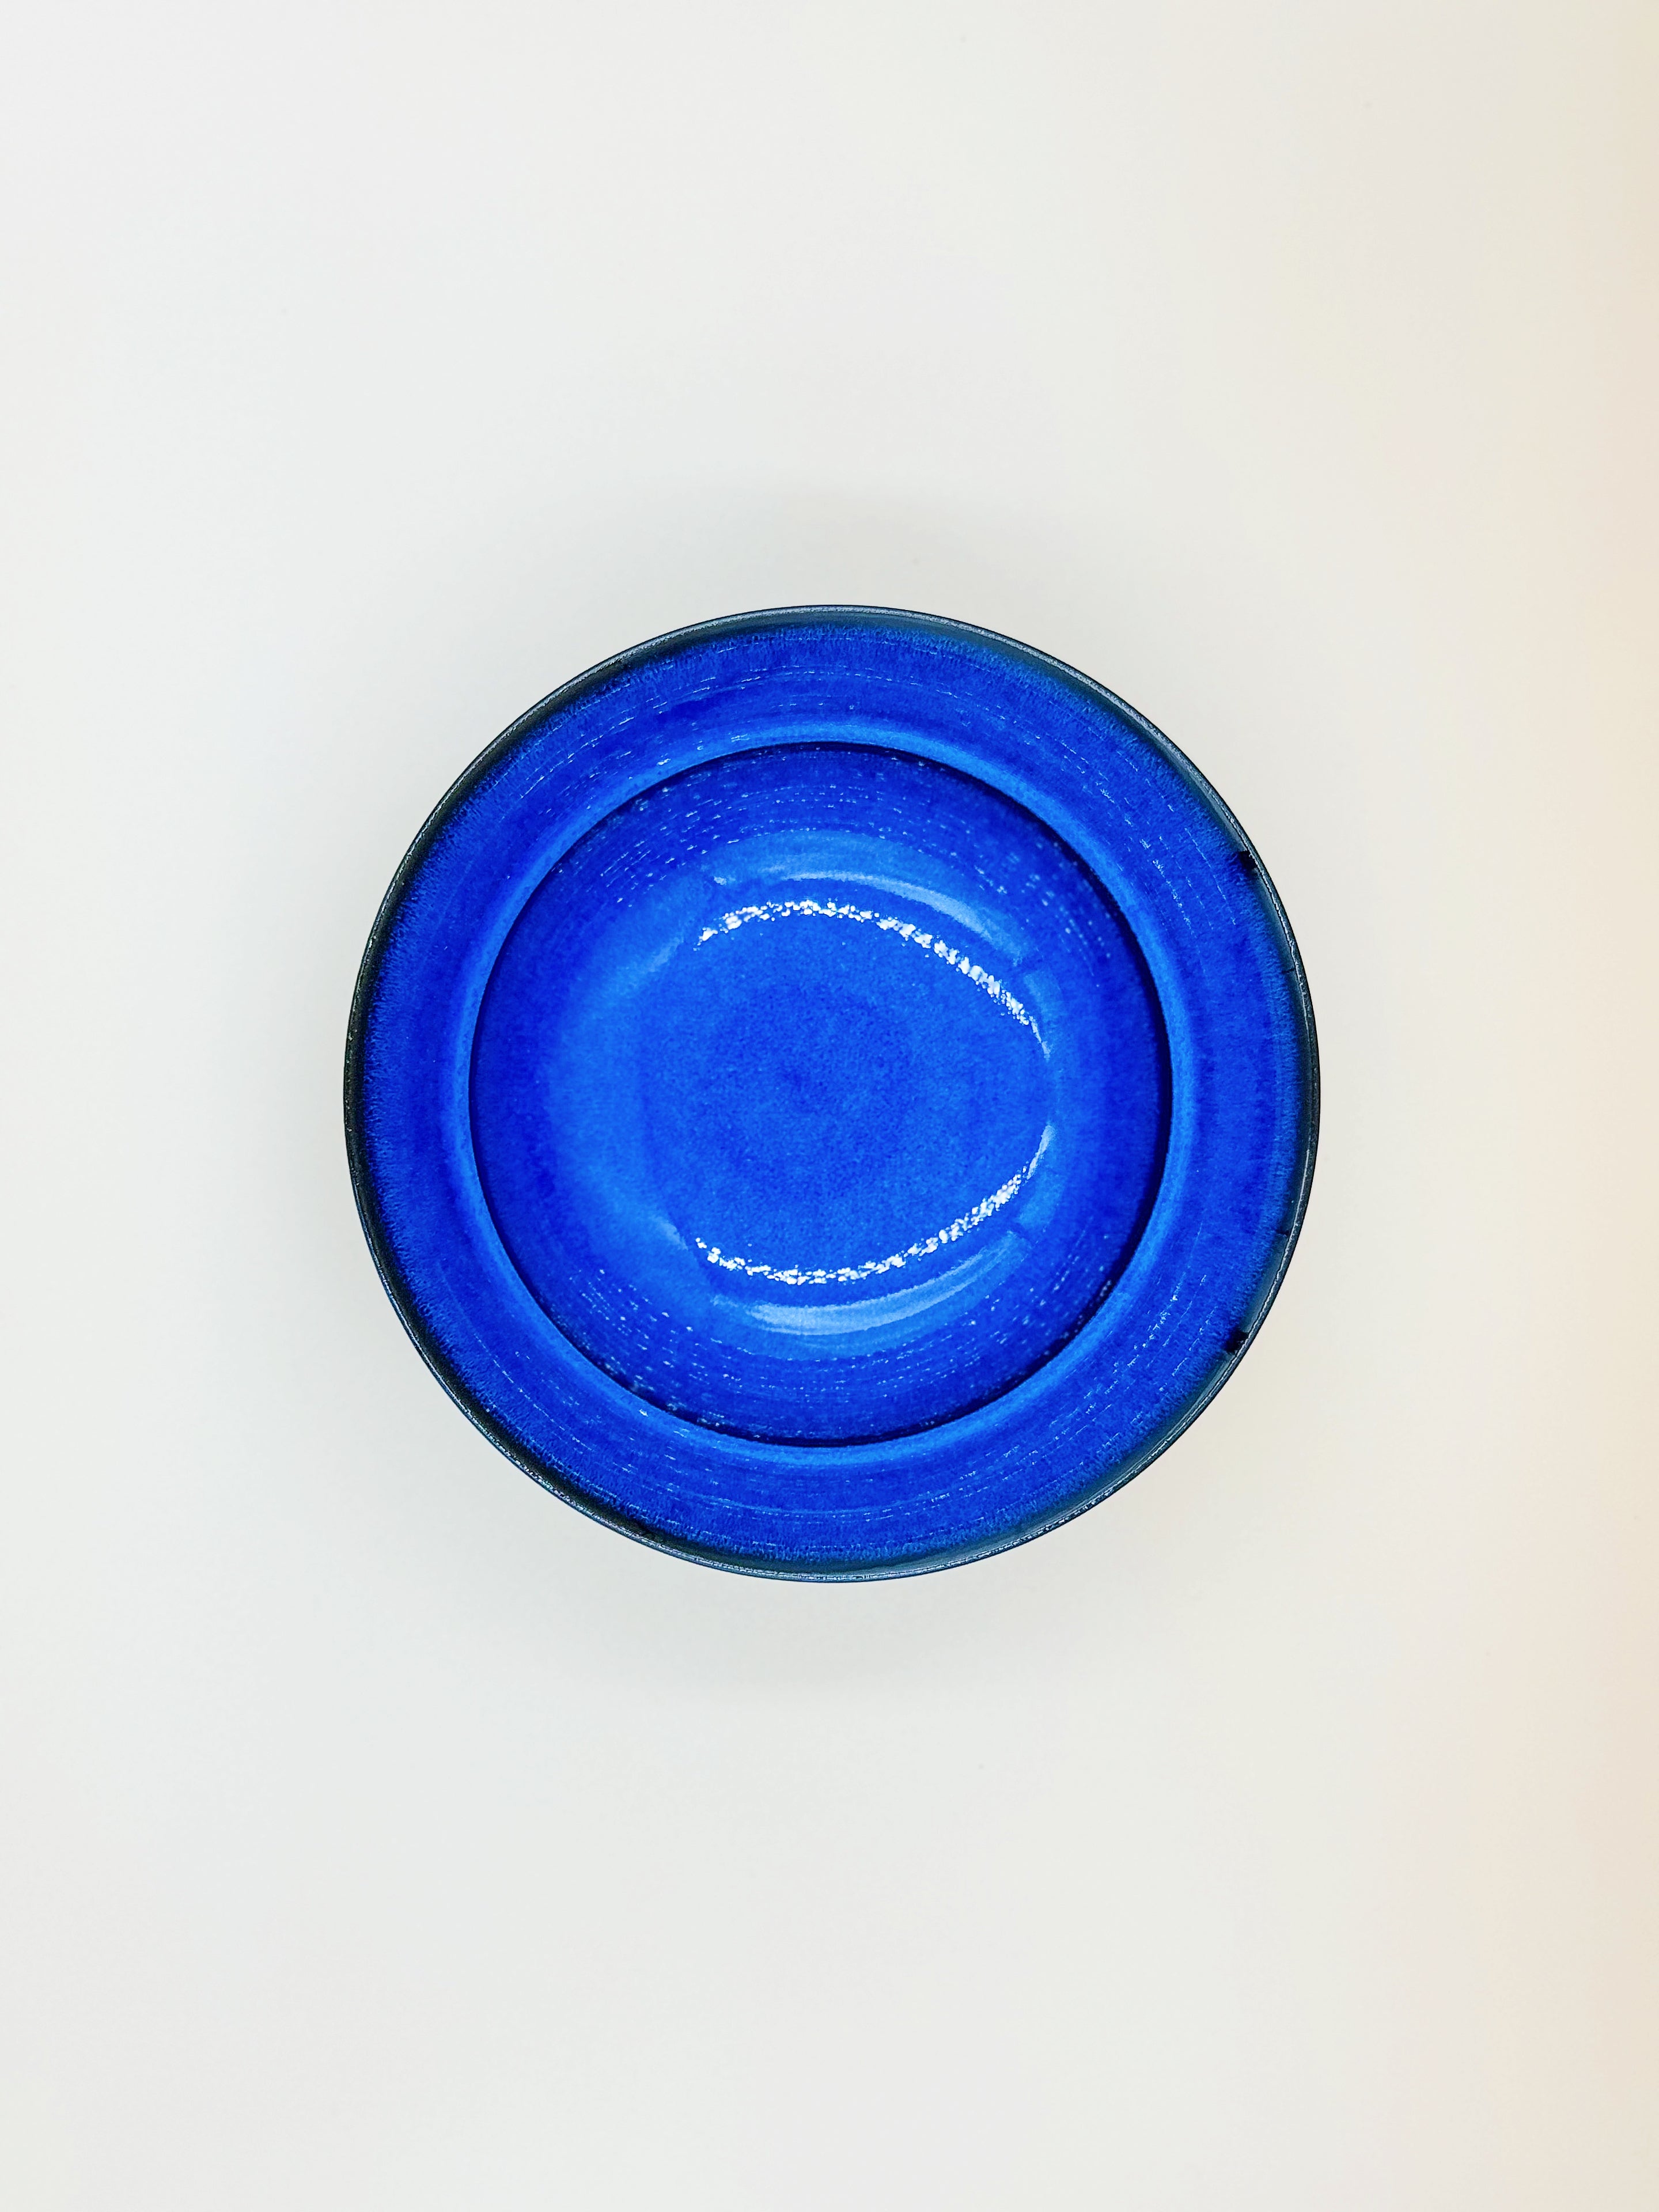 Blue glazed bowl from the top angle